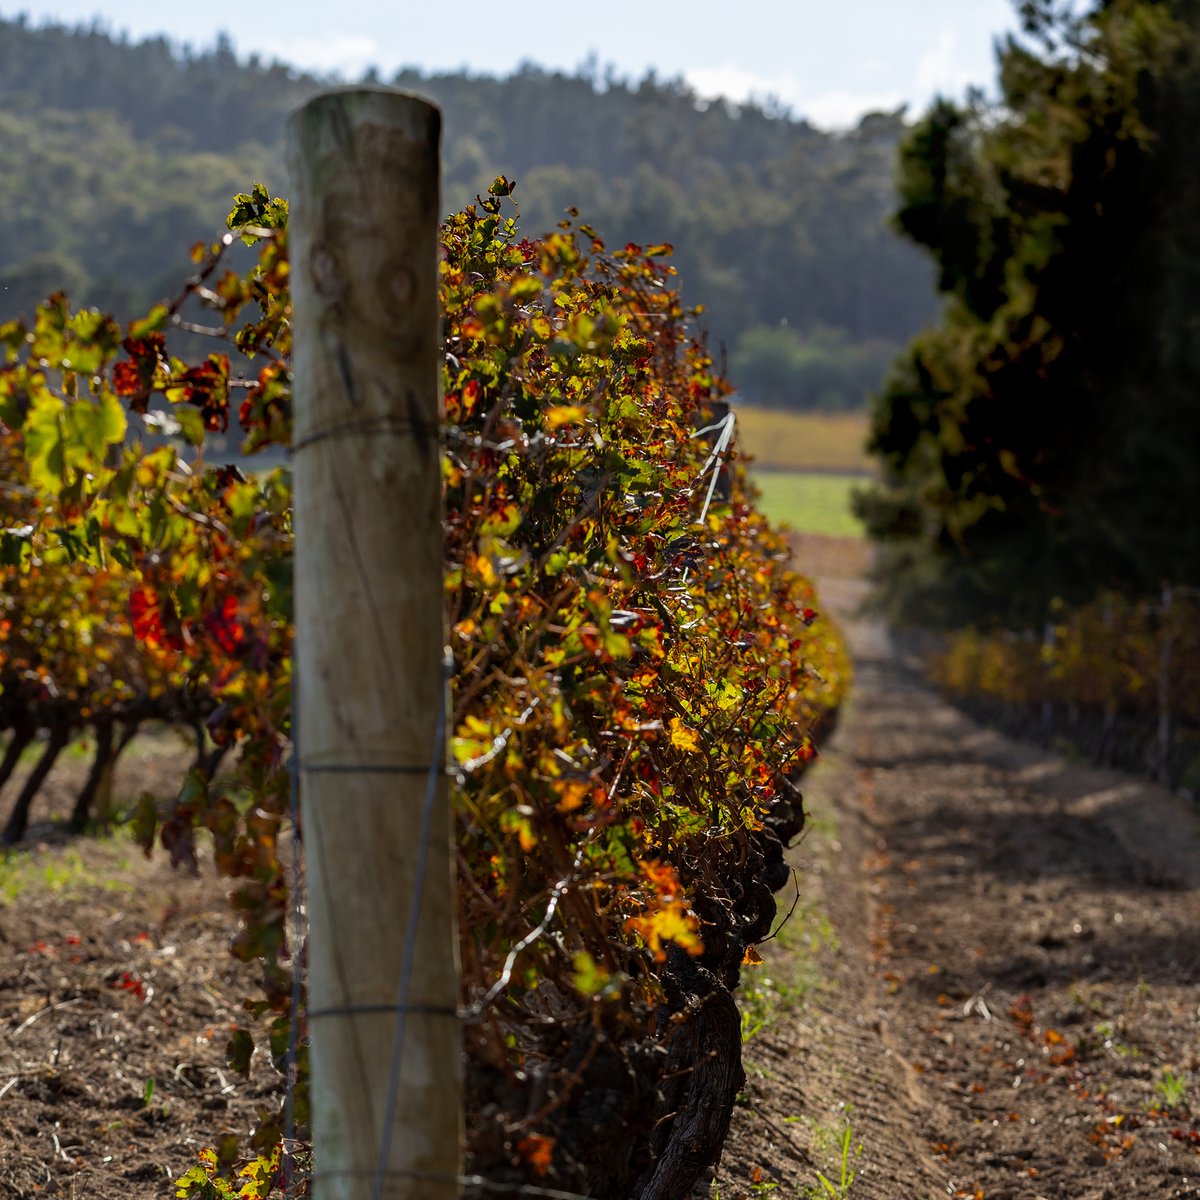 Just as summer celebrates the fertile greenery of the vineyard and foliage, the autumn months herald the arrival of deep reds, yellow hues and golden-like leaves.